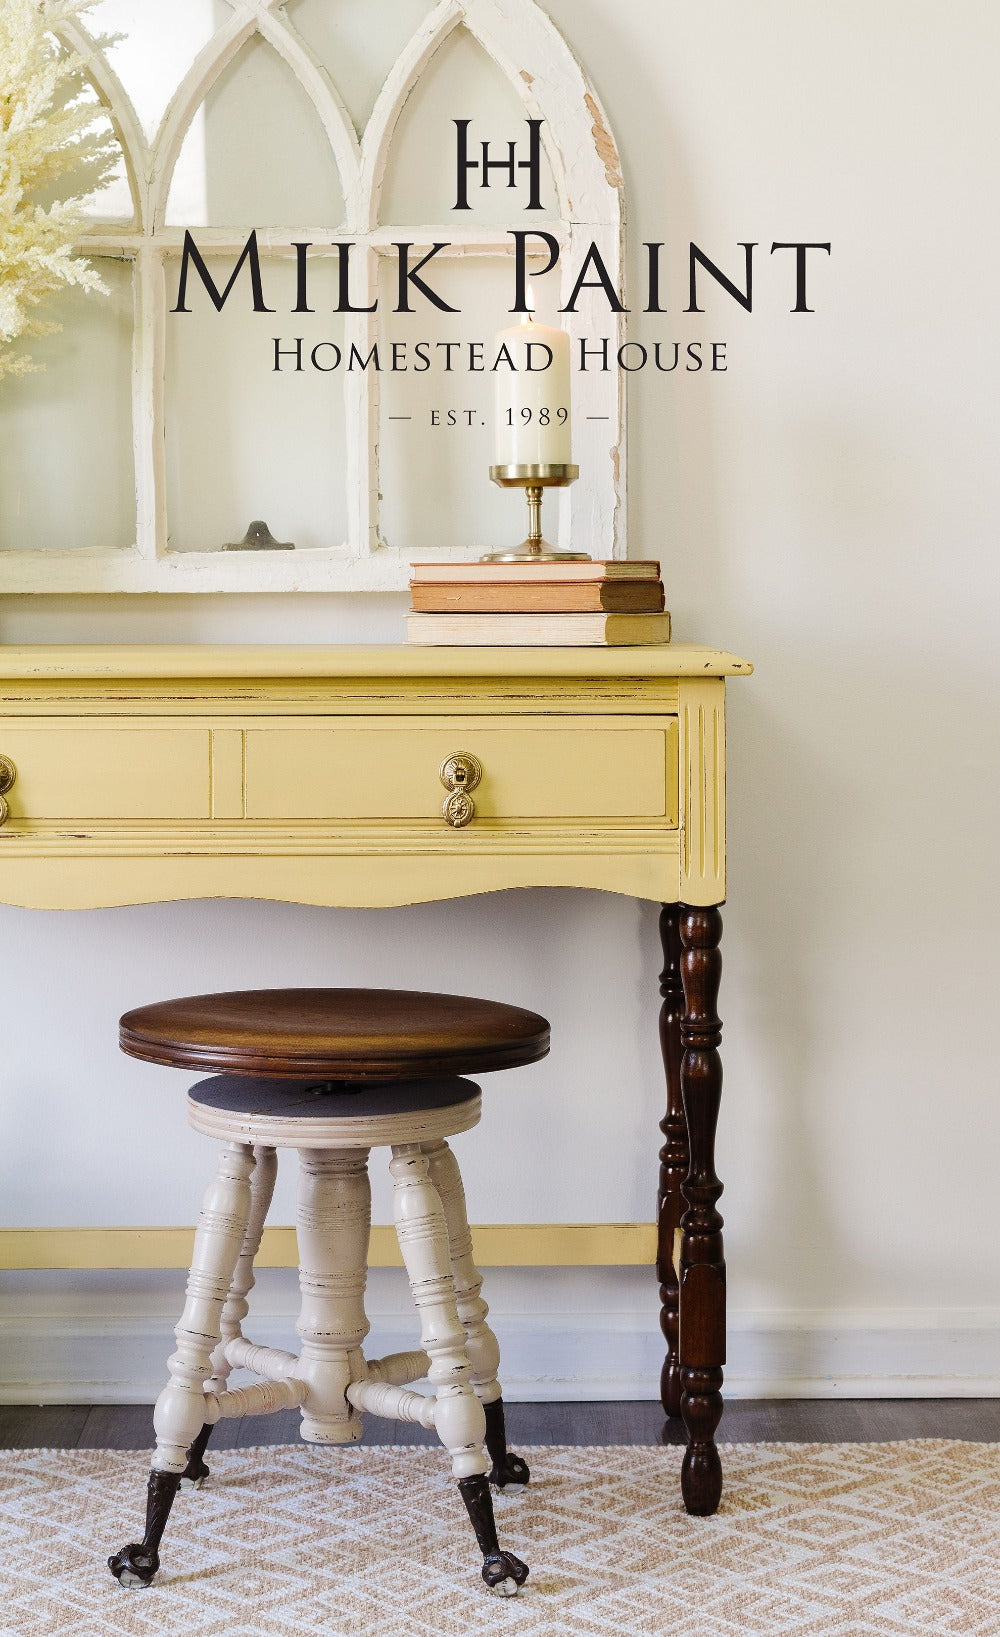 SWEDISH YELLOW Milk Paint by Homestead House 50g and 300g